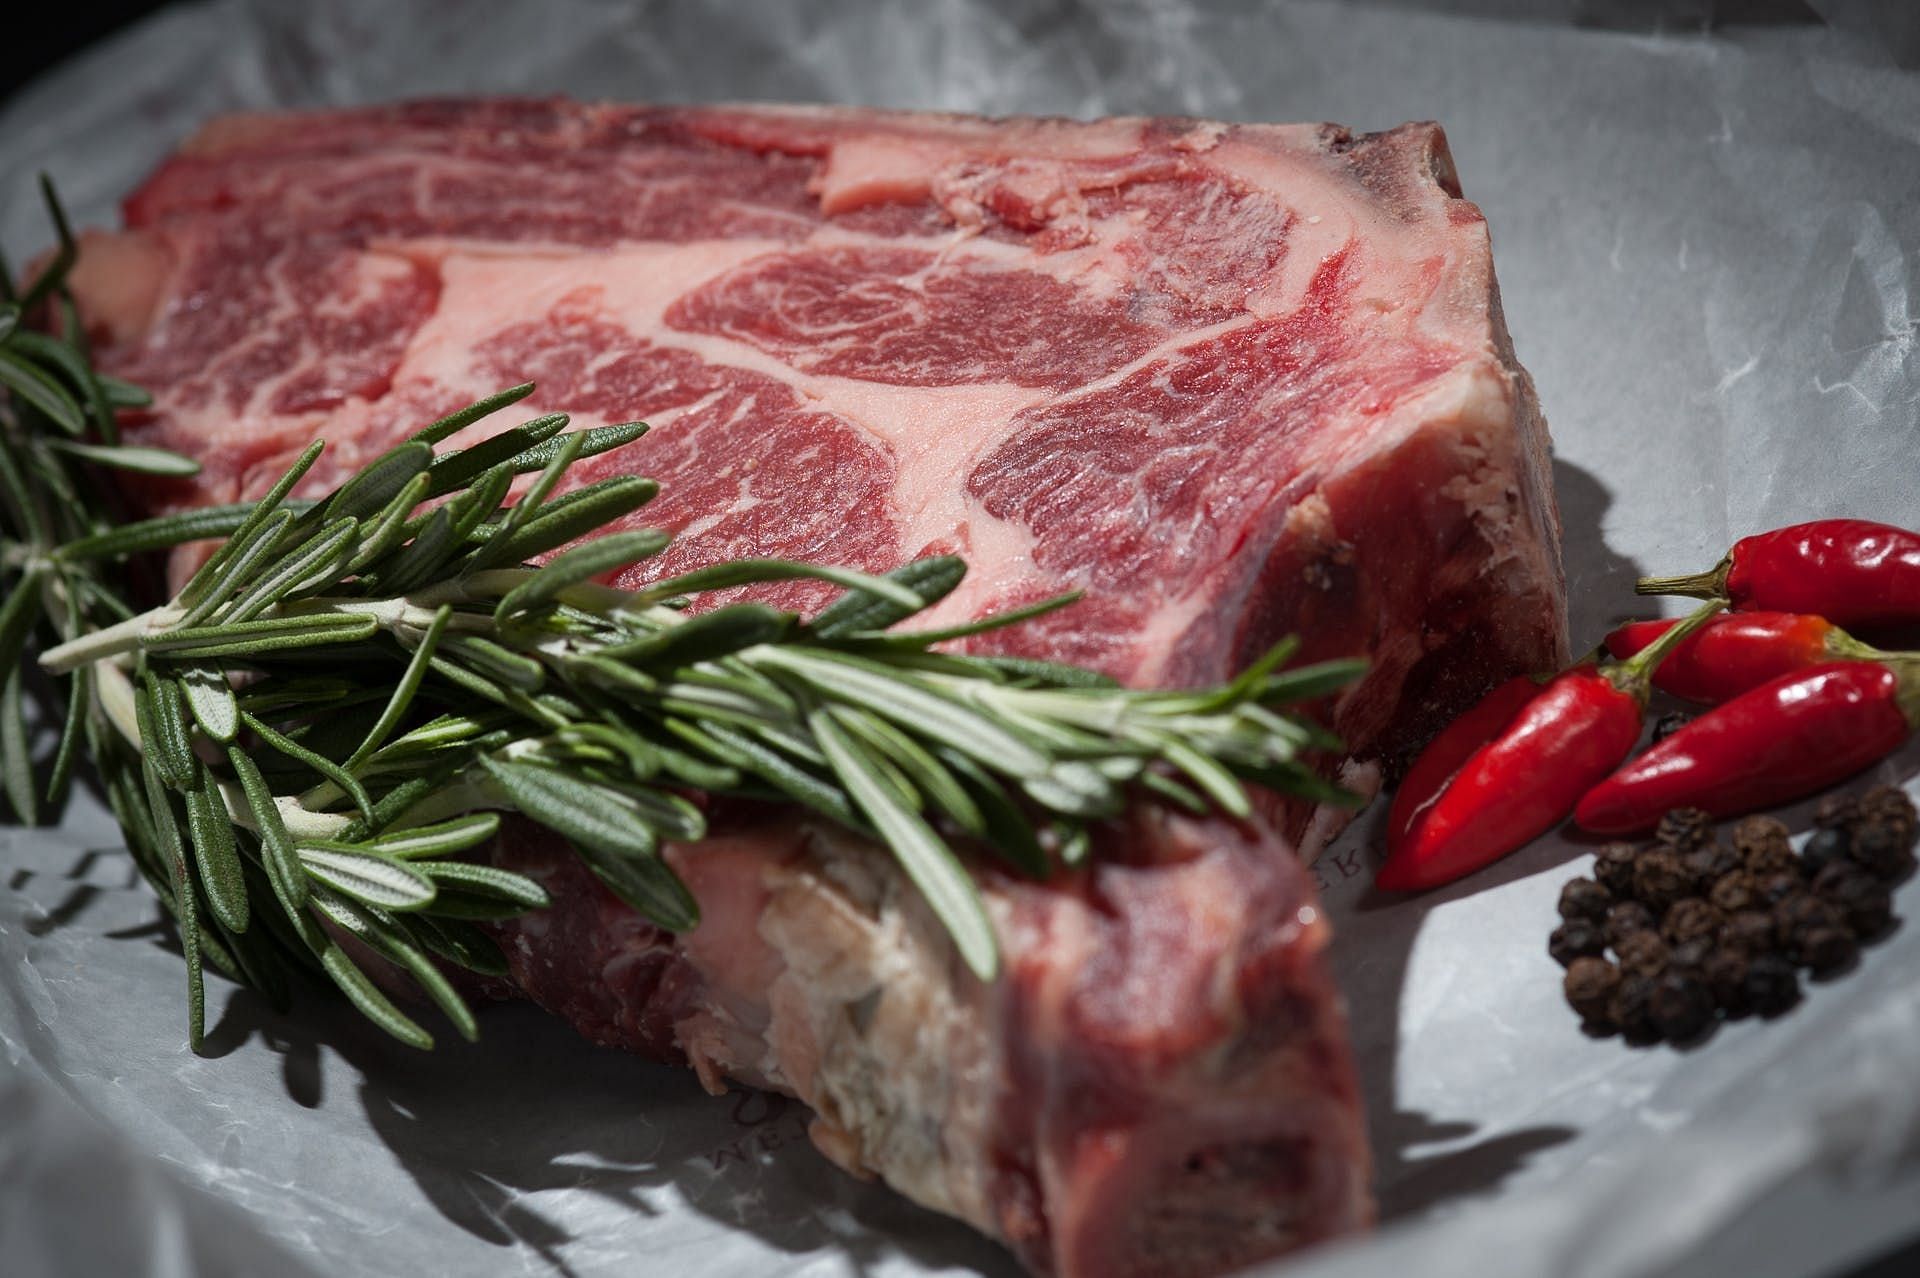 Red meats as brain foods (image sourced via Pexels / Photo by mali)